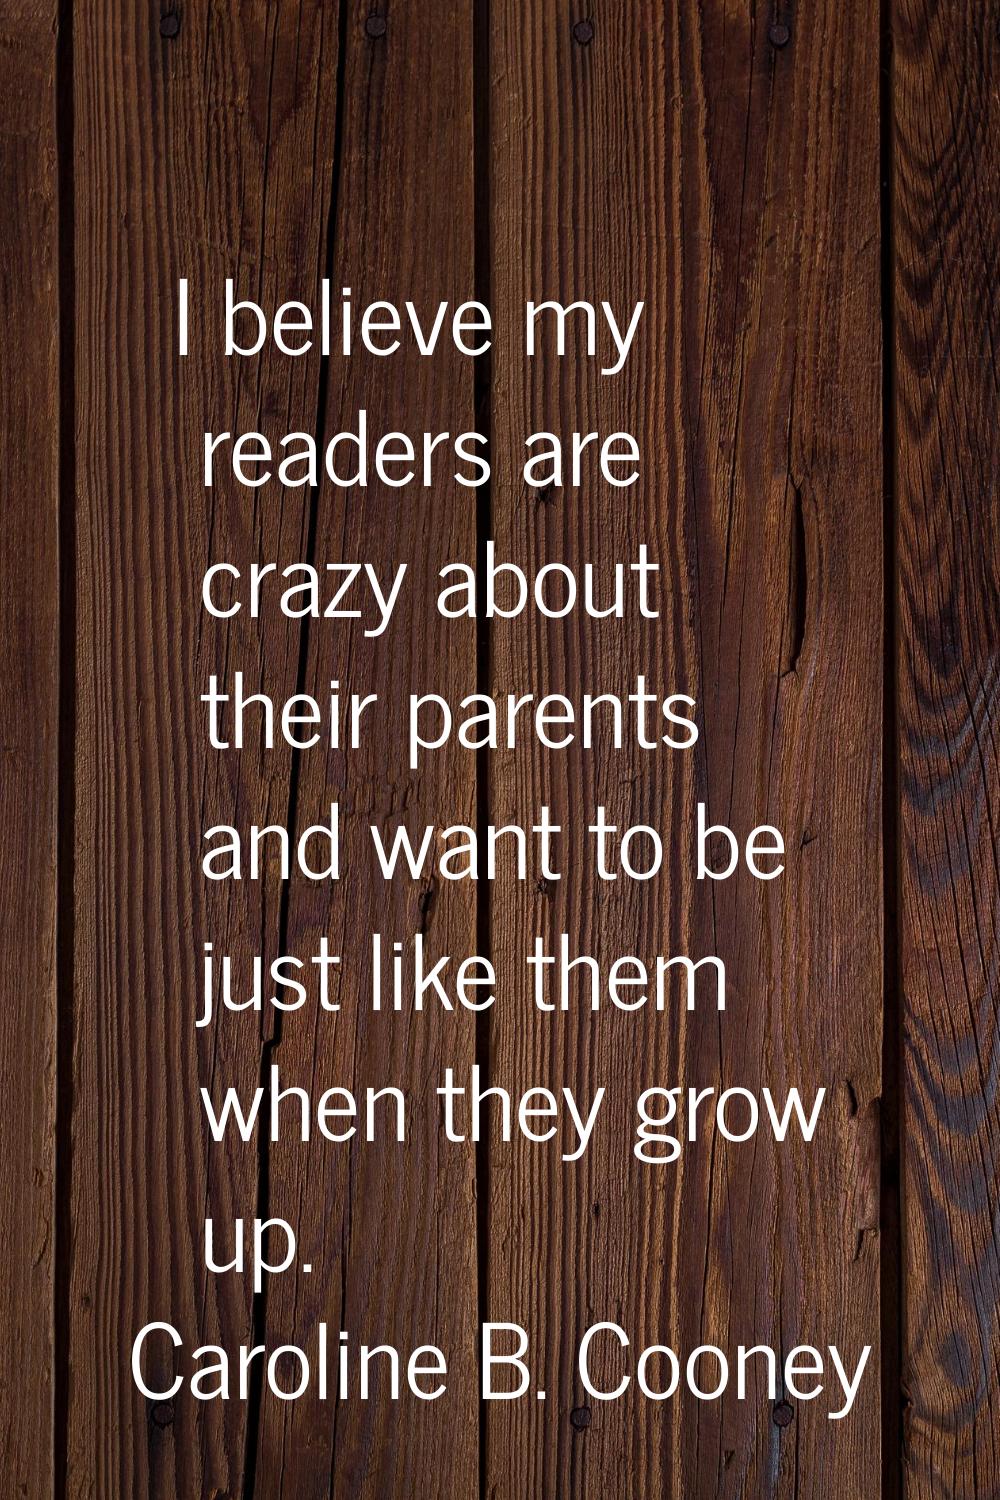 I believe my readers are crazy about their parents and want to be just like them when they grow up.